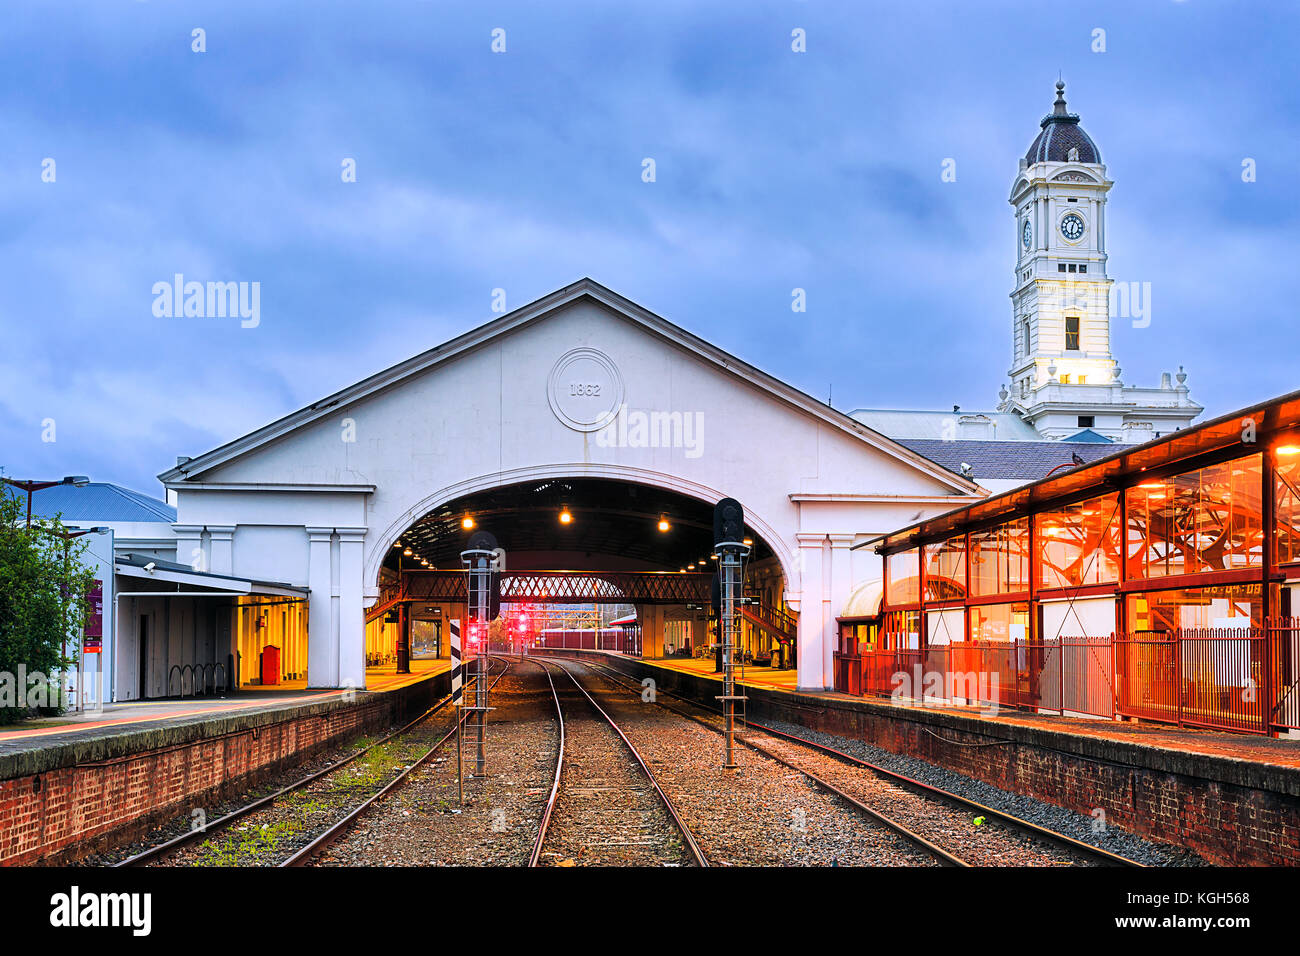 Regional town in Victoria - Ballarat. Historic train station on victorial railways with clock tower and multiple tracks to platforms. Stock Photo